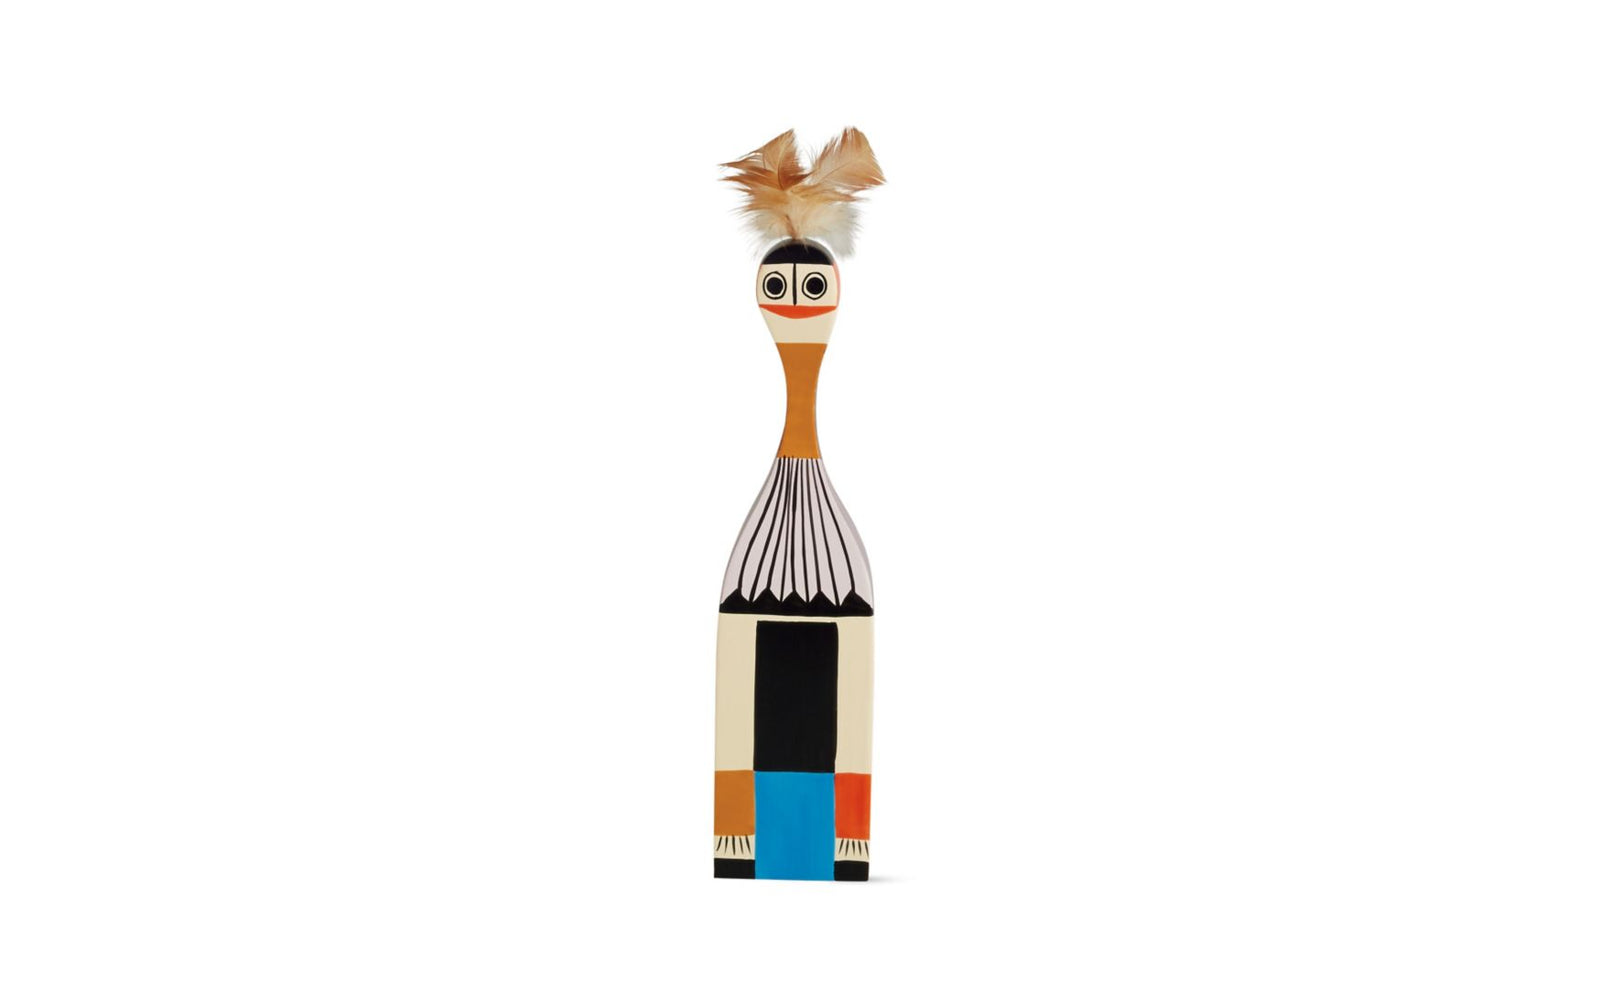 Girard Wooden Doll No.18 by Vitra - Grounded